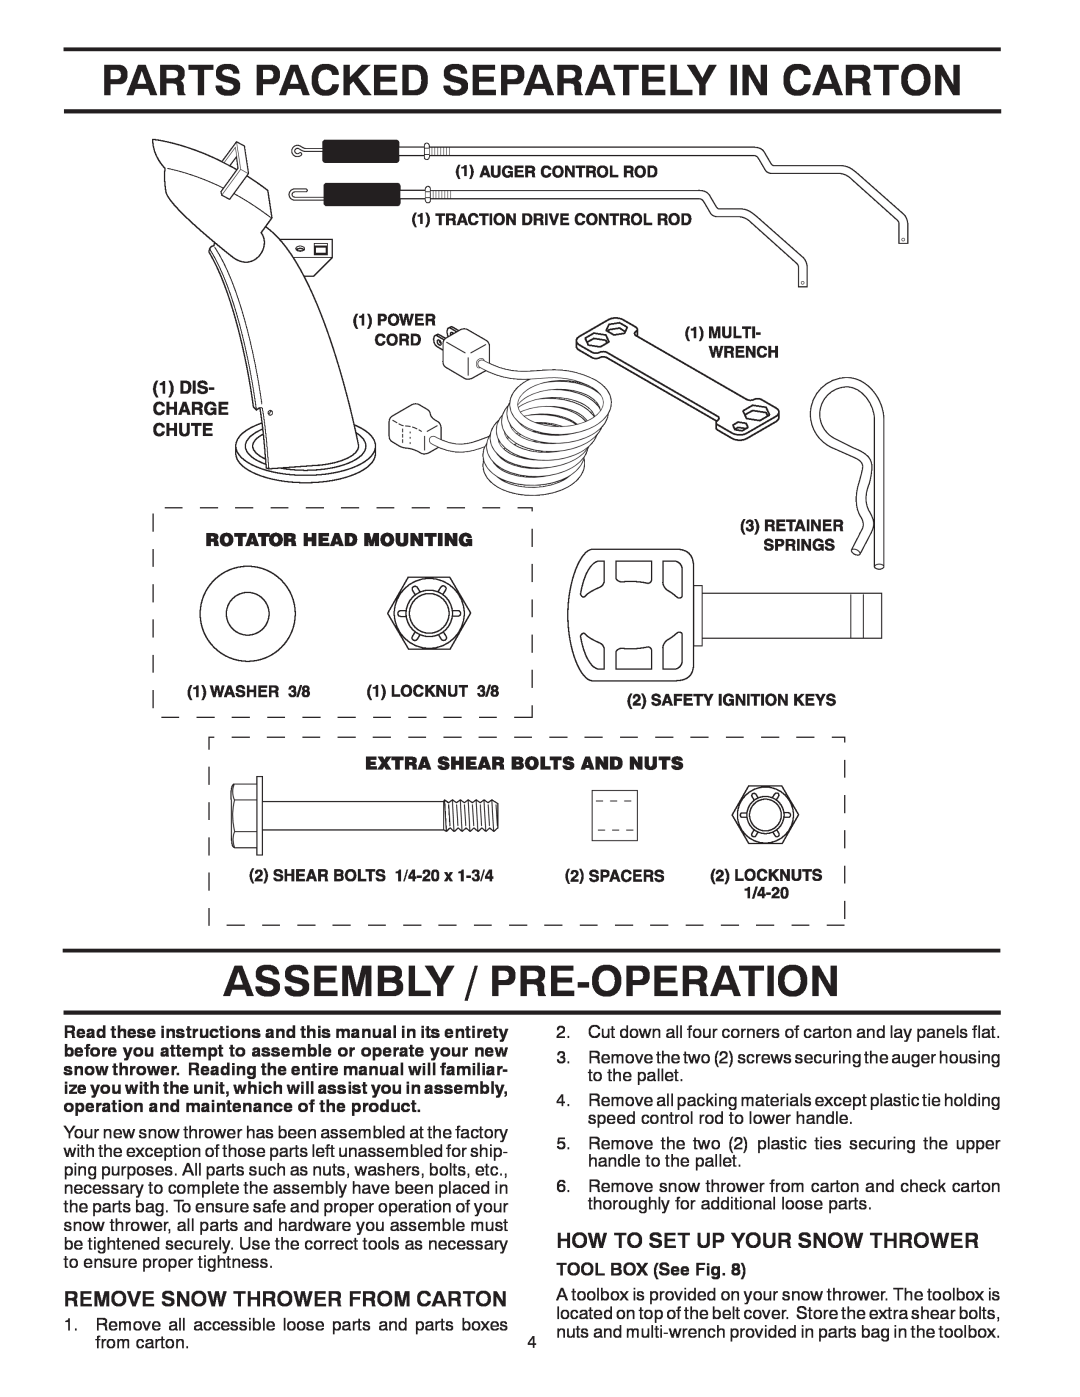 Poulan 421469 owner manual Parts Packed Separately In Carton, Assembly / Pre-Operation, How To Set Up Your Snow Thrower 